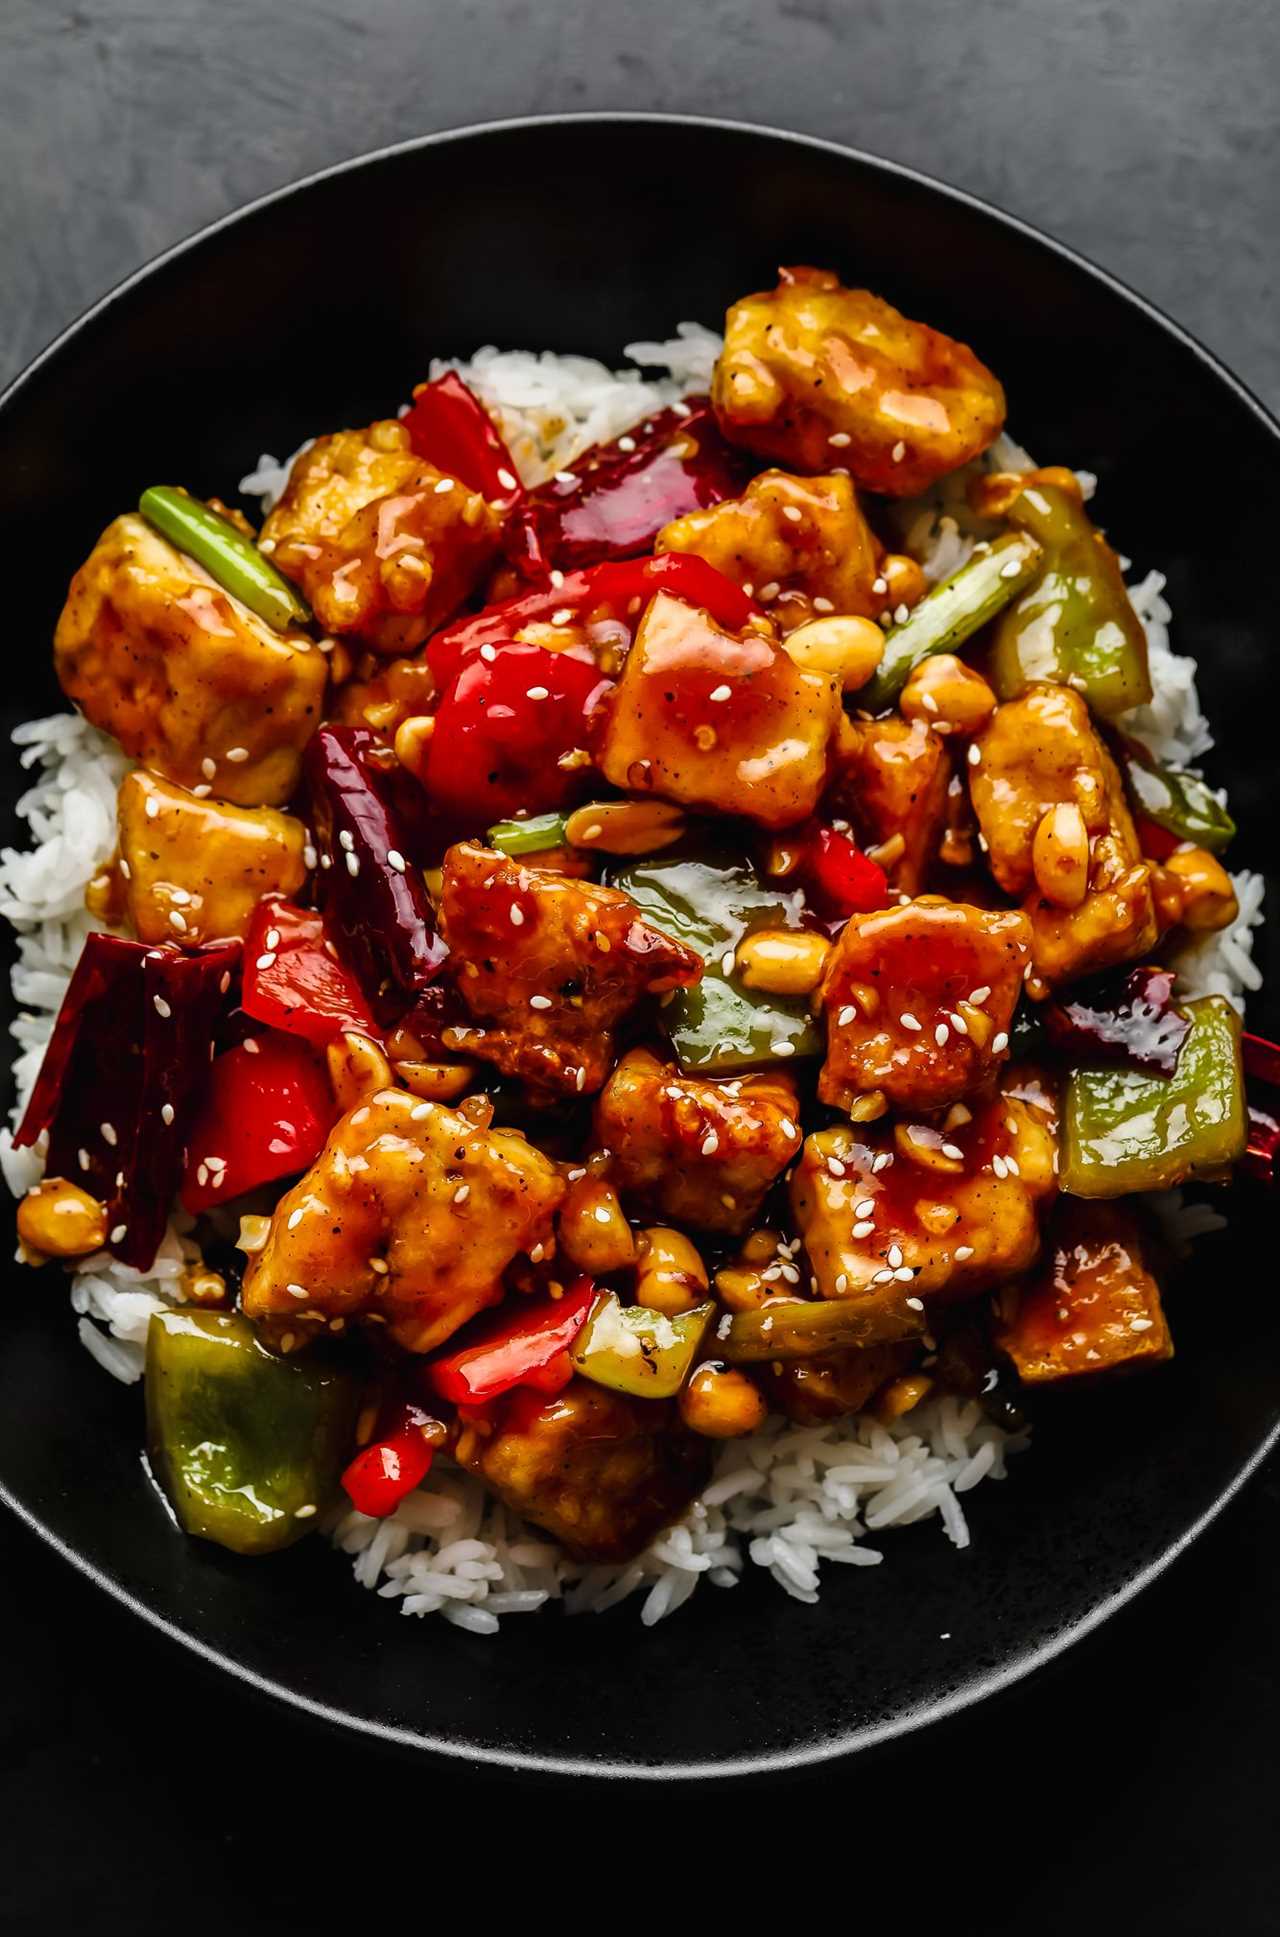 vegan kung pao tofu and vegetables served on a bed of rice in a black bowl.